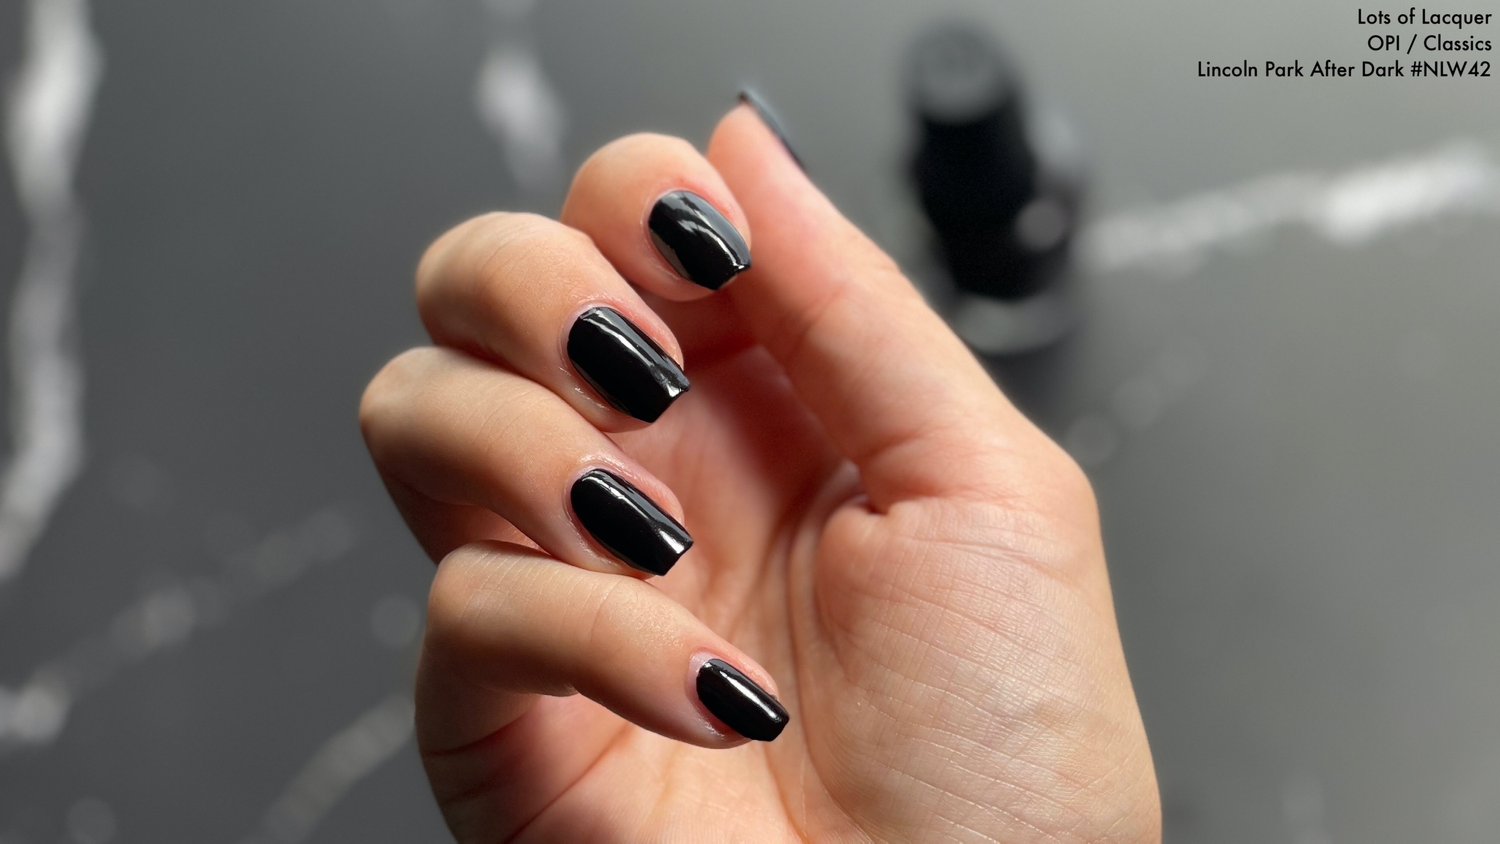 1. OPI Nail Lacquer in "Lincoln Park After Dark" - wide 5